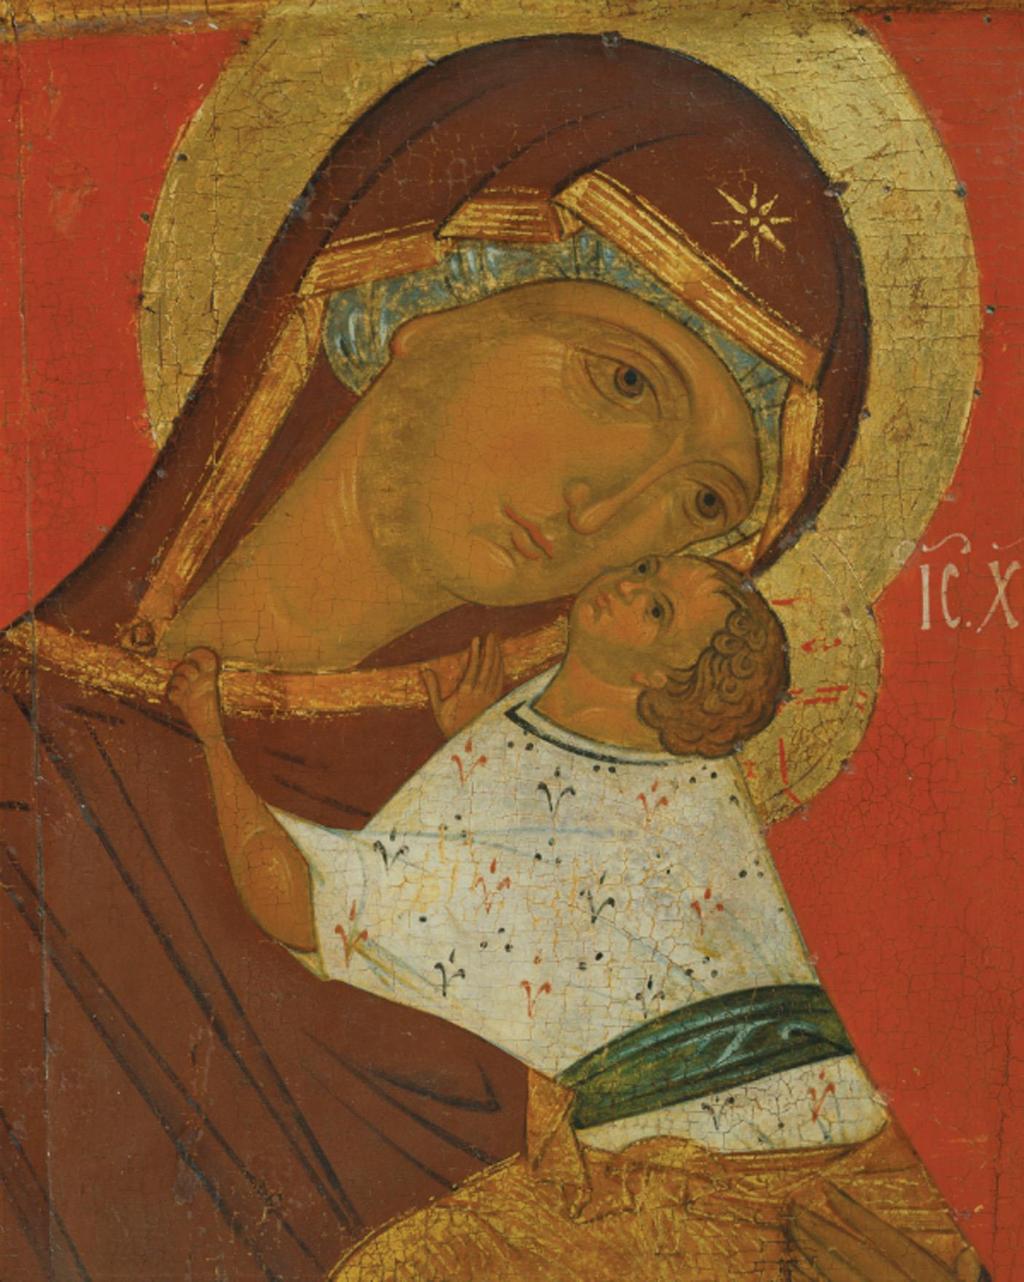 Figure 21.2 This icon, from the 15th century, depicts Mary and the Christ Child.